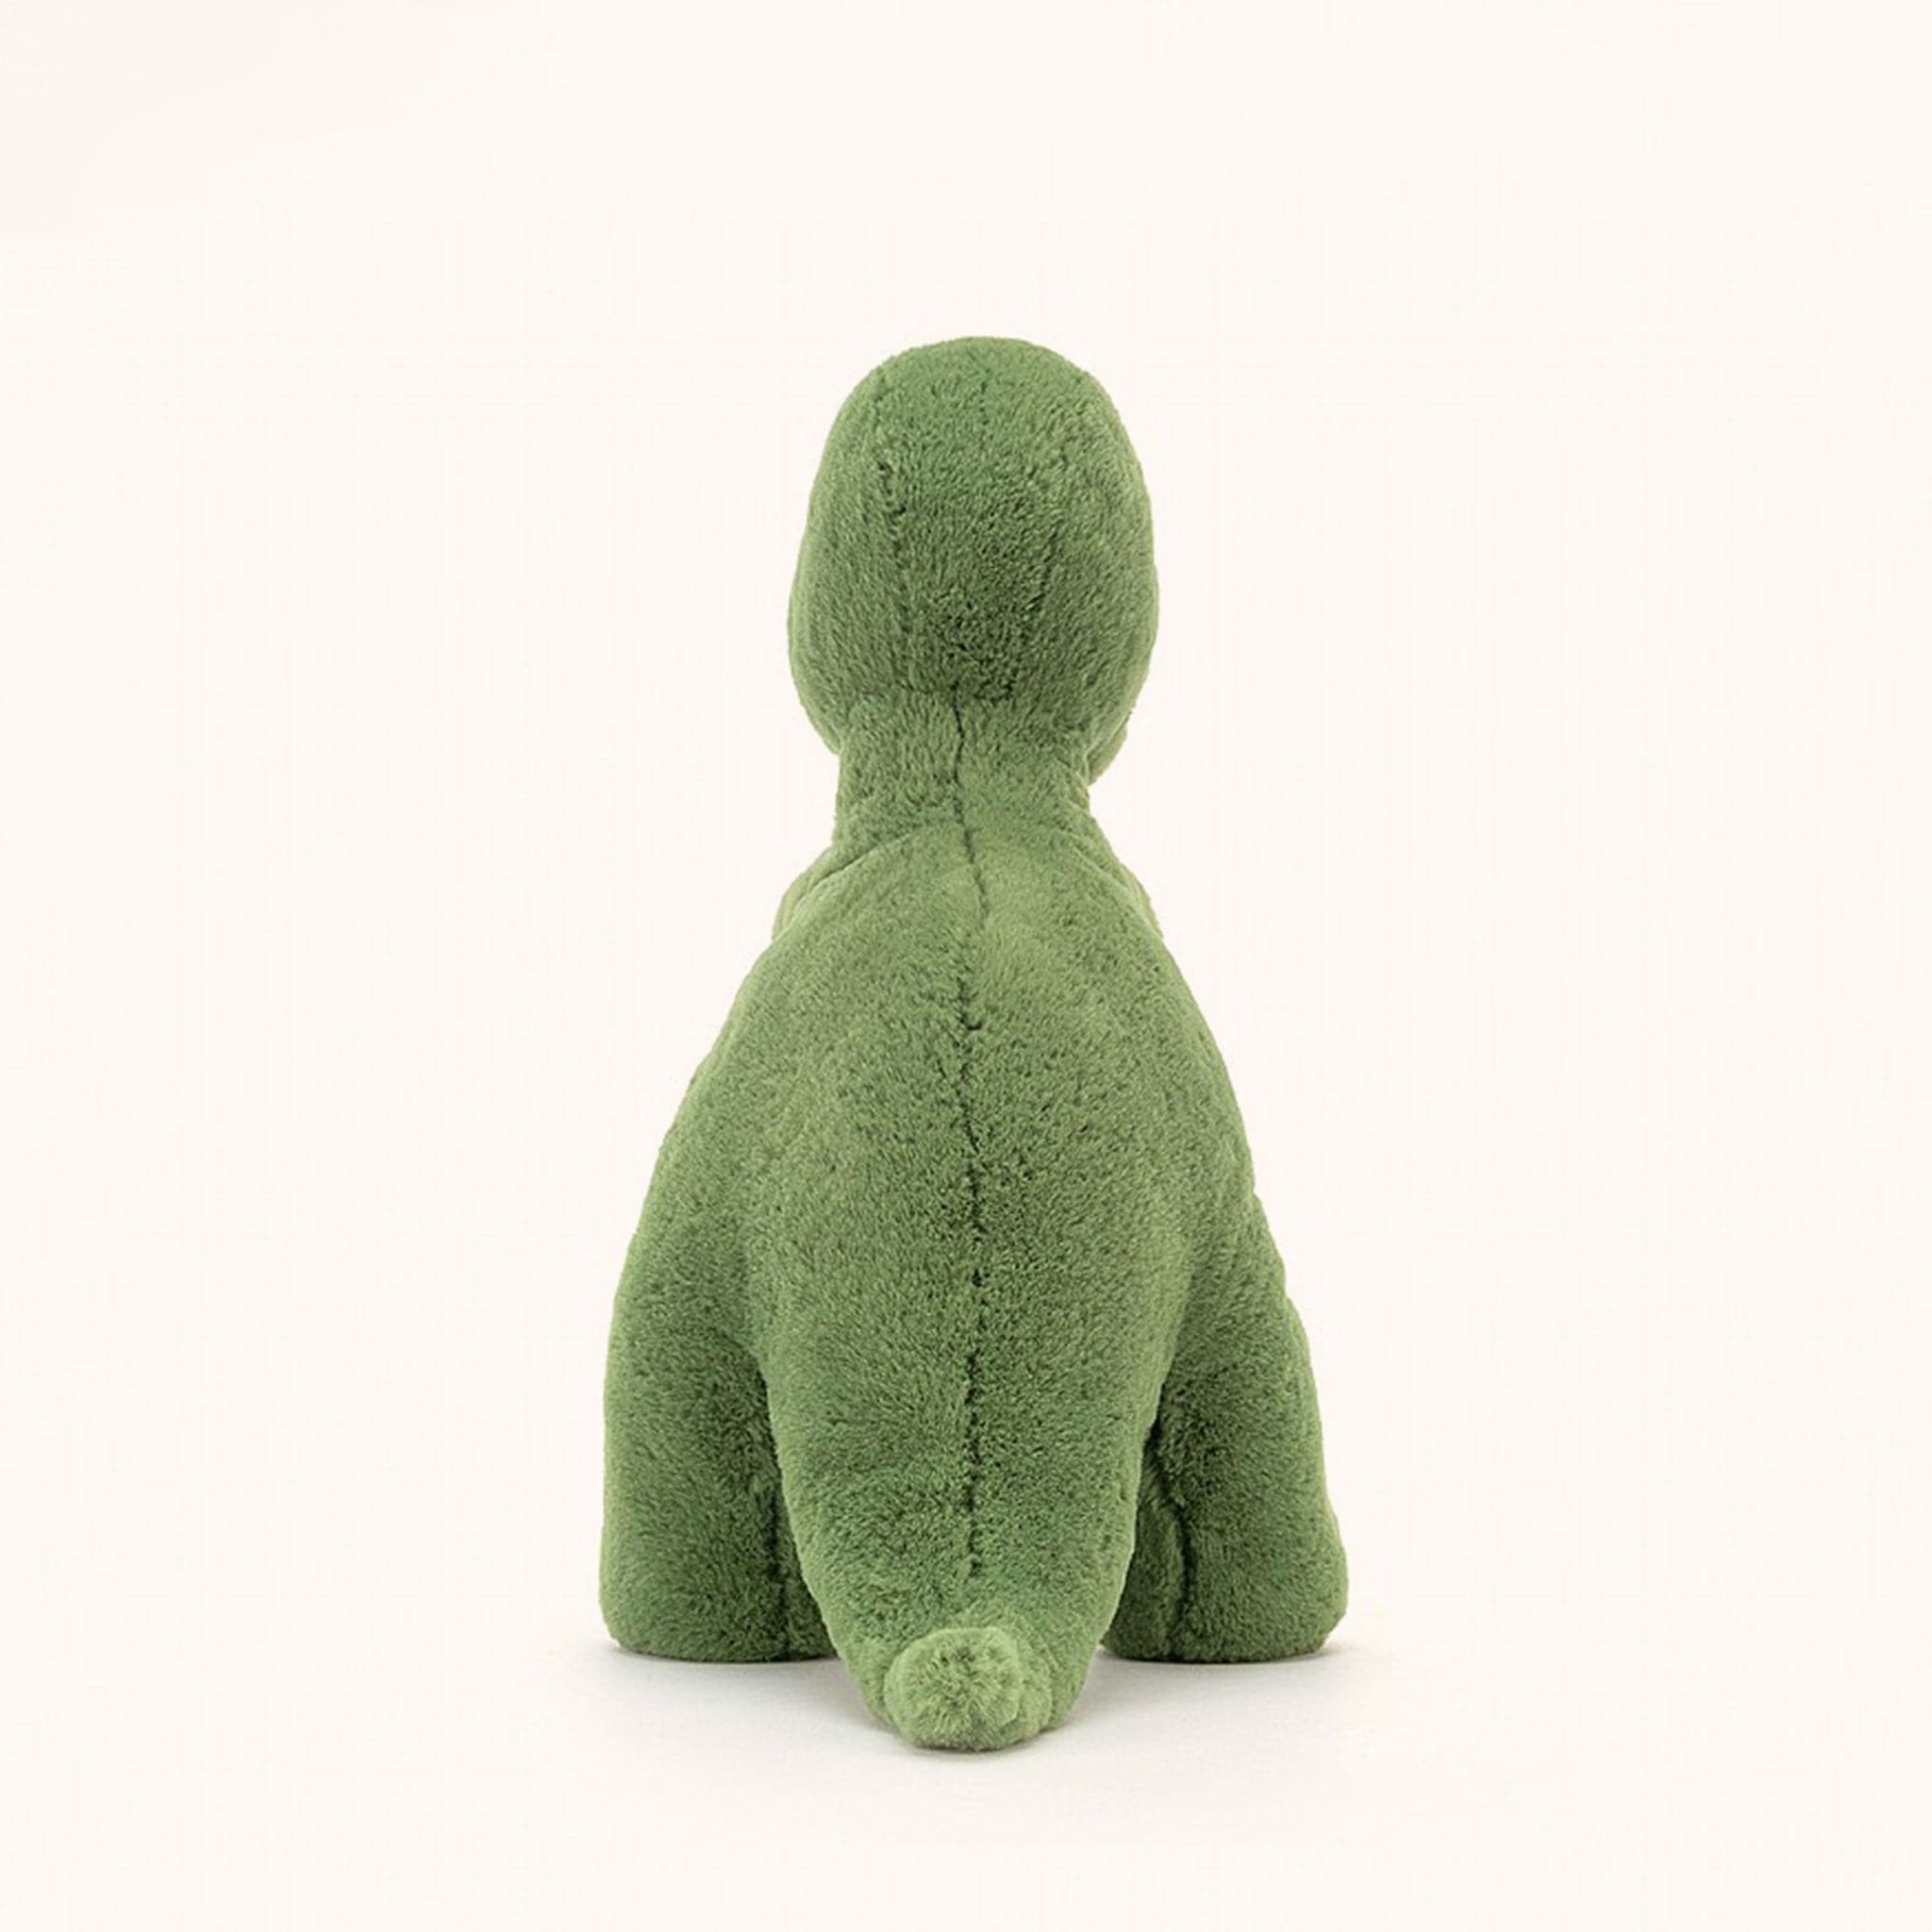 Soft stuffed animal in the shape of a green T-Rex.